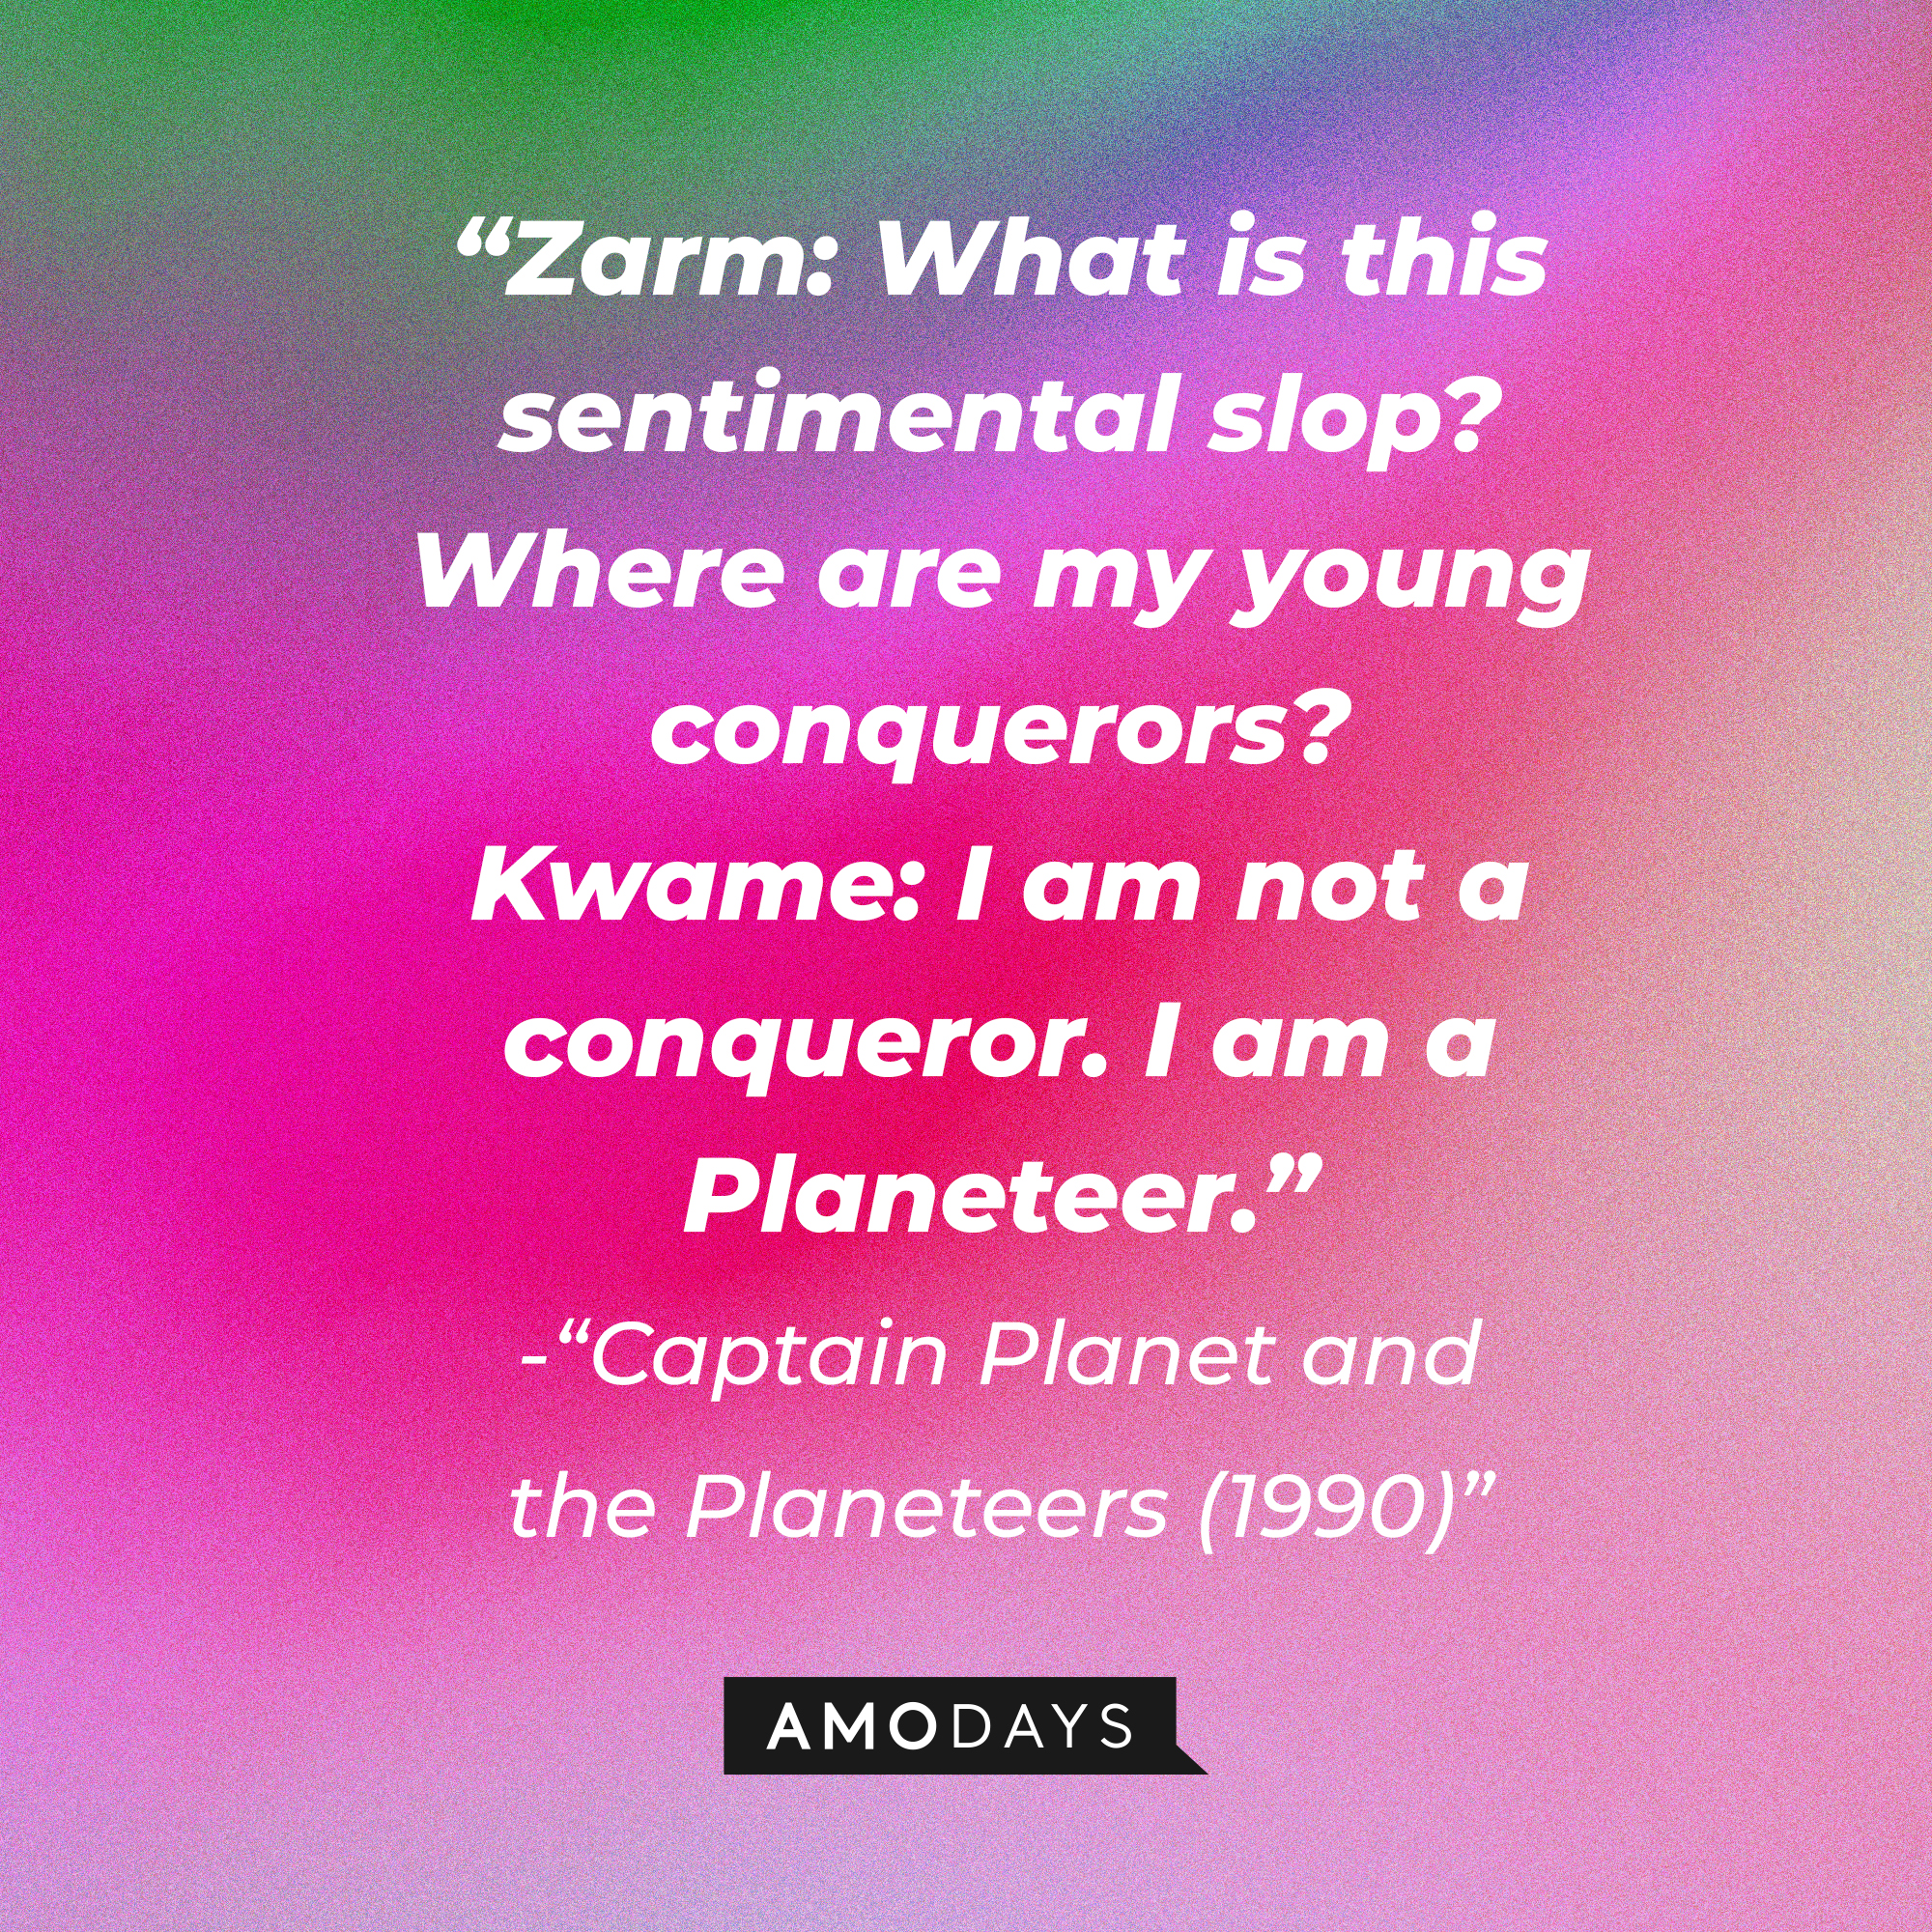 “Captain Planet and the Planeteers (1990)” dialogue: “Zarm: What is this sentimental slop? Where are my young conquerors? Kwame: I am not a conqueror. I am a Planeteer.” | Source: Amodays